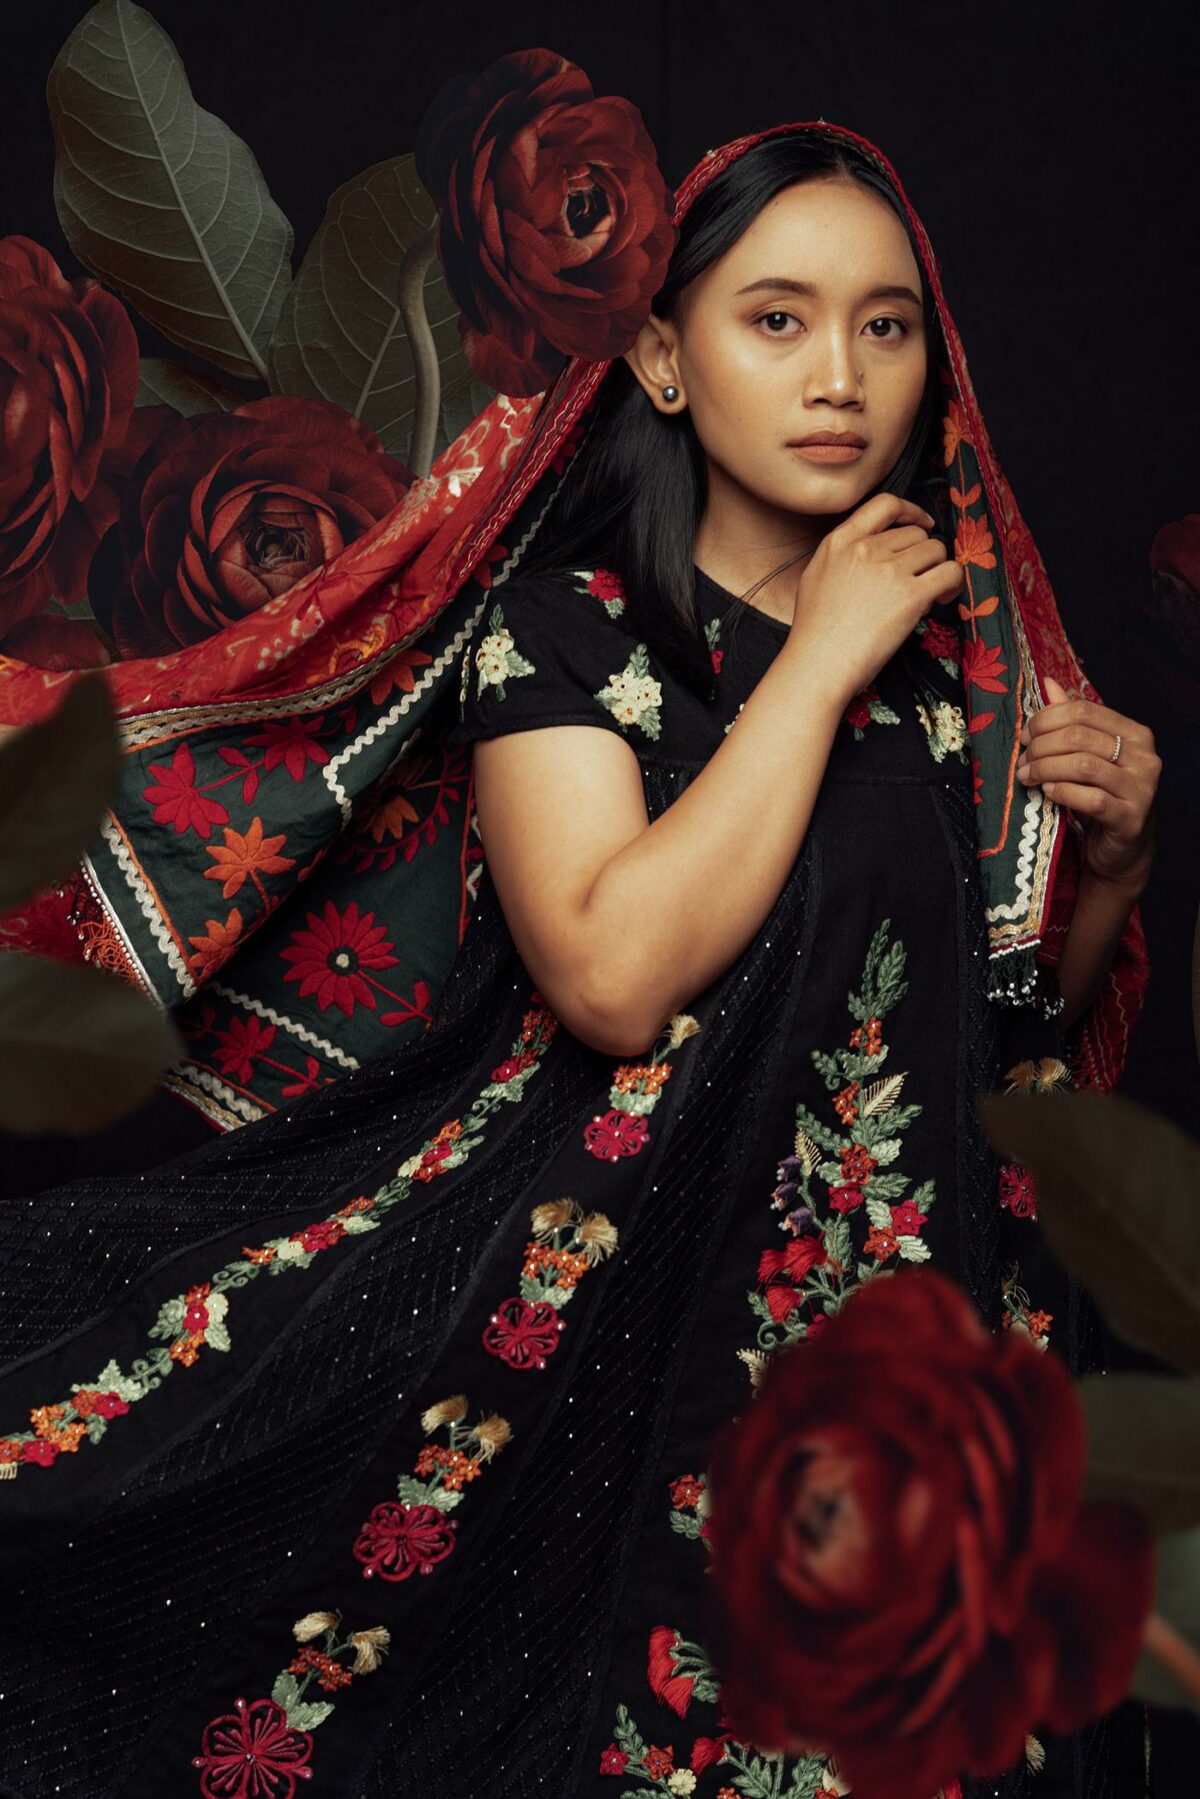 Project Puan A Gorgeous And Delicate Portrait Series On Indonesian Women By Nicoline Patricia Malina 3